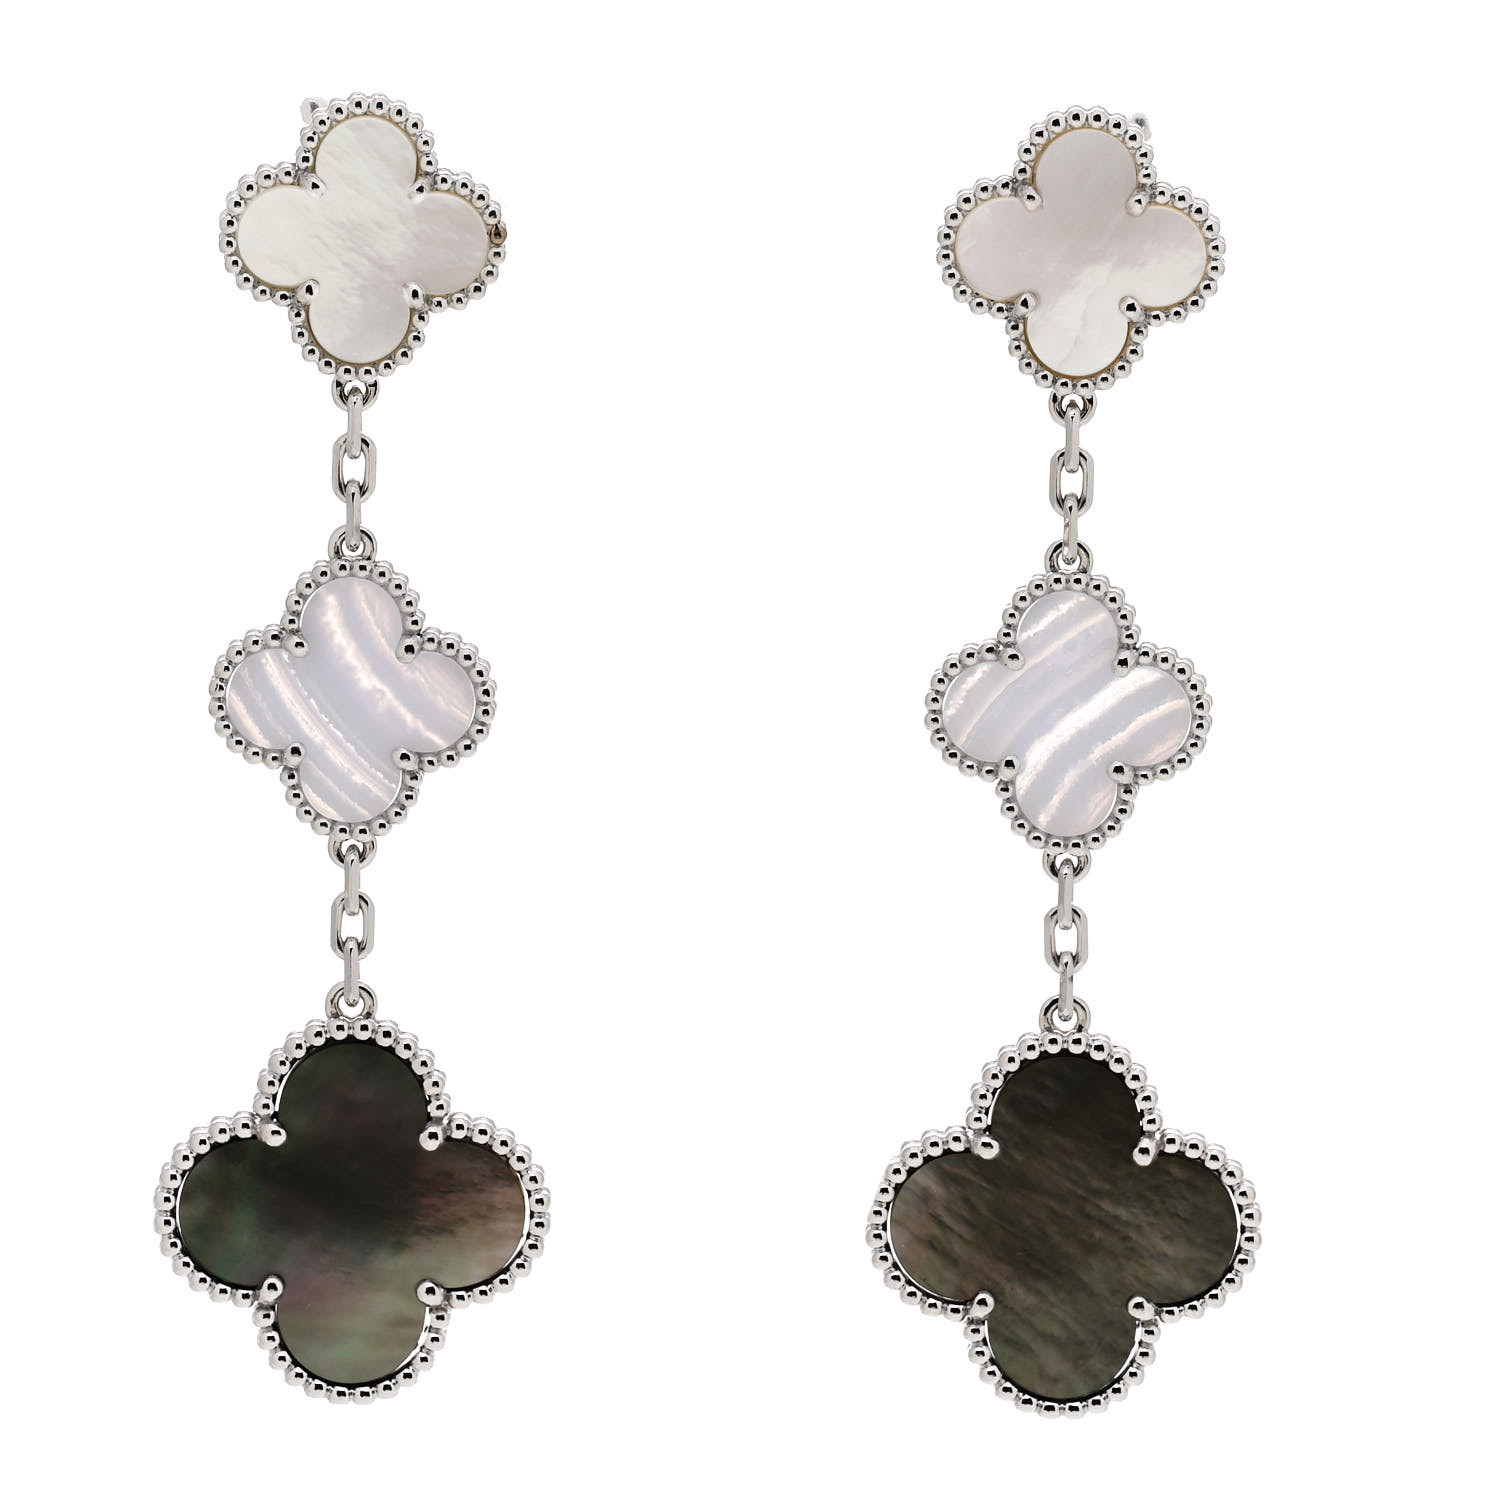 VAN CLEEF & ARPELS 18K White Gold Mother of Pearl Chalcedony 3 Motifs Magic Alhambra Earrings by FASHIONPHILE